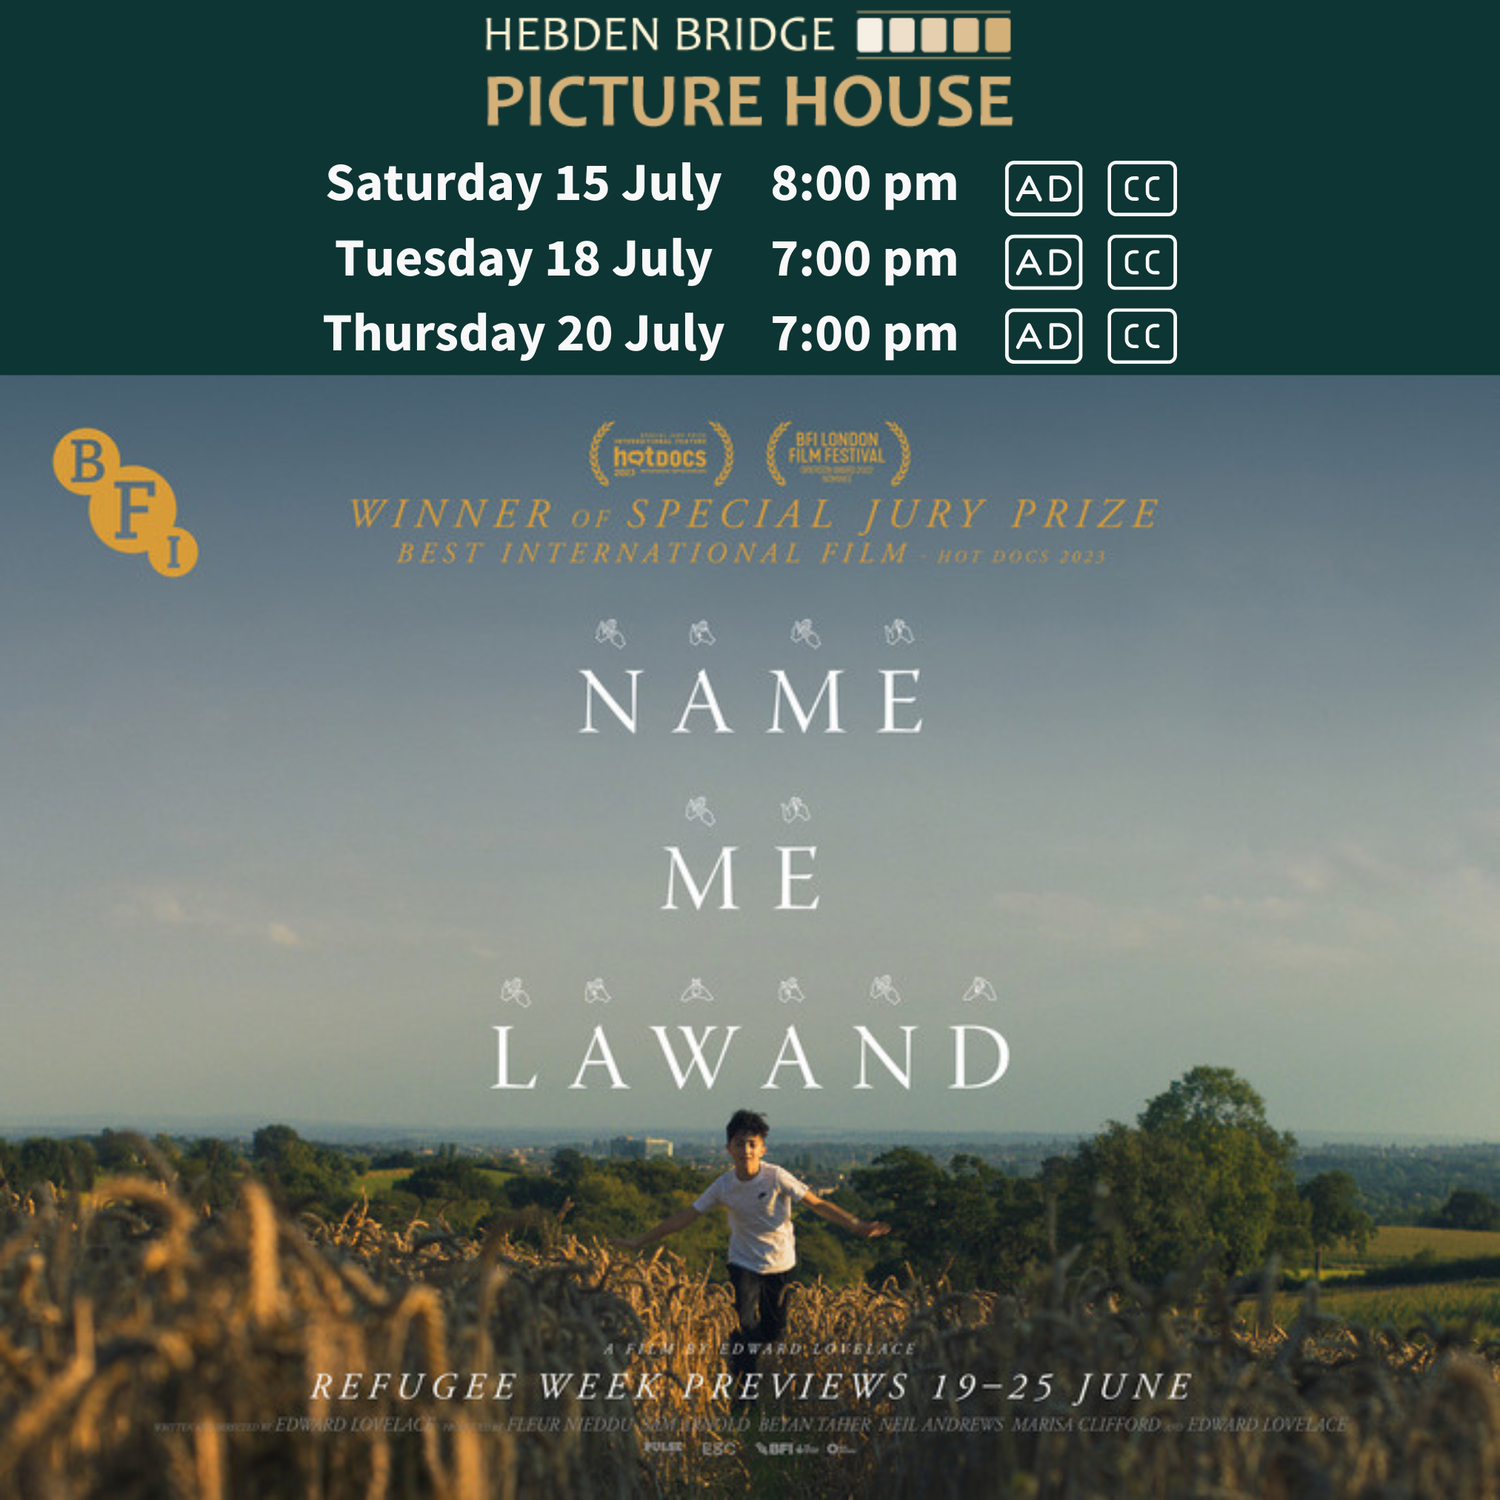 Name Me Lawand Film Screening Poster at Hedben Bridge Picture House